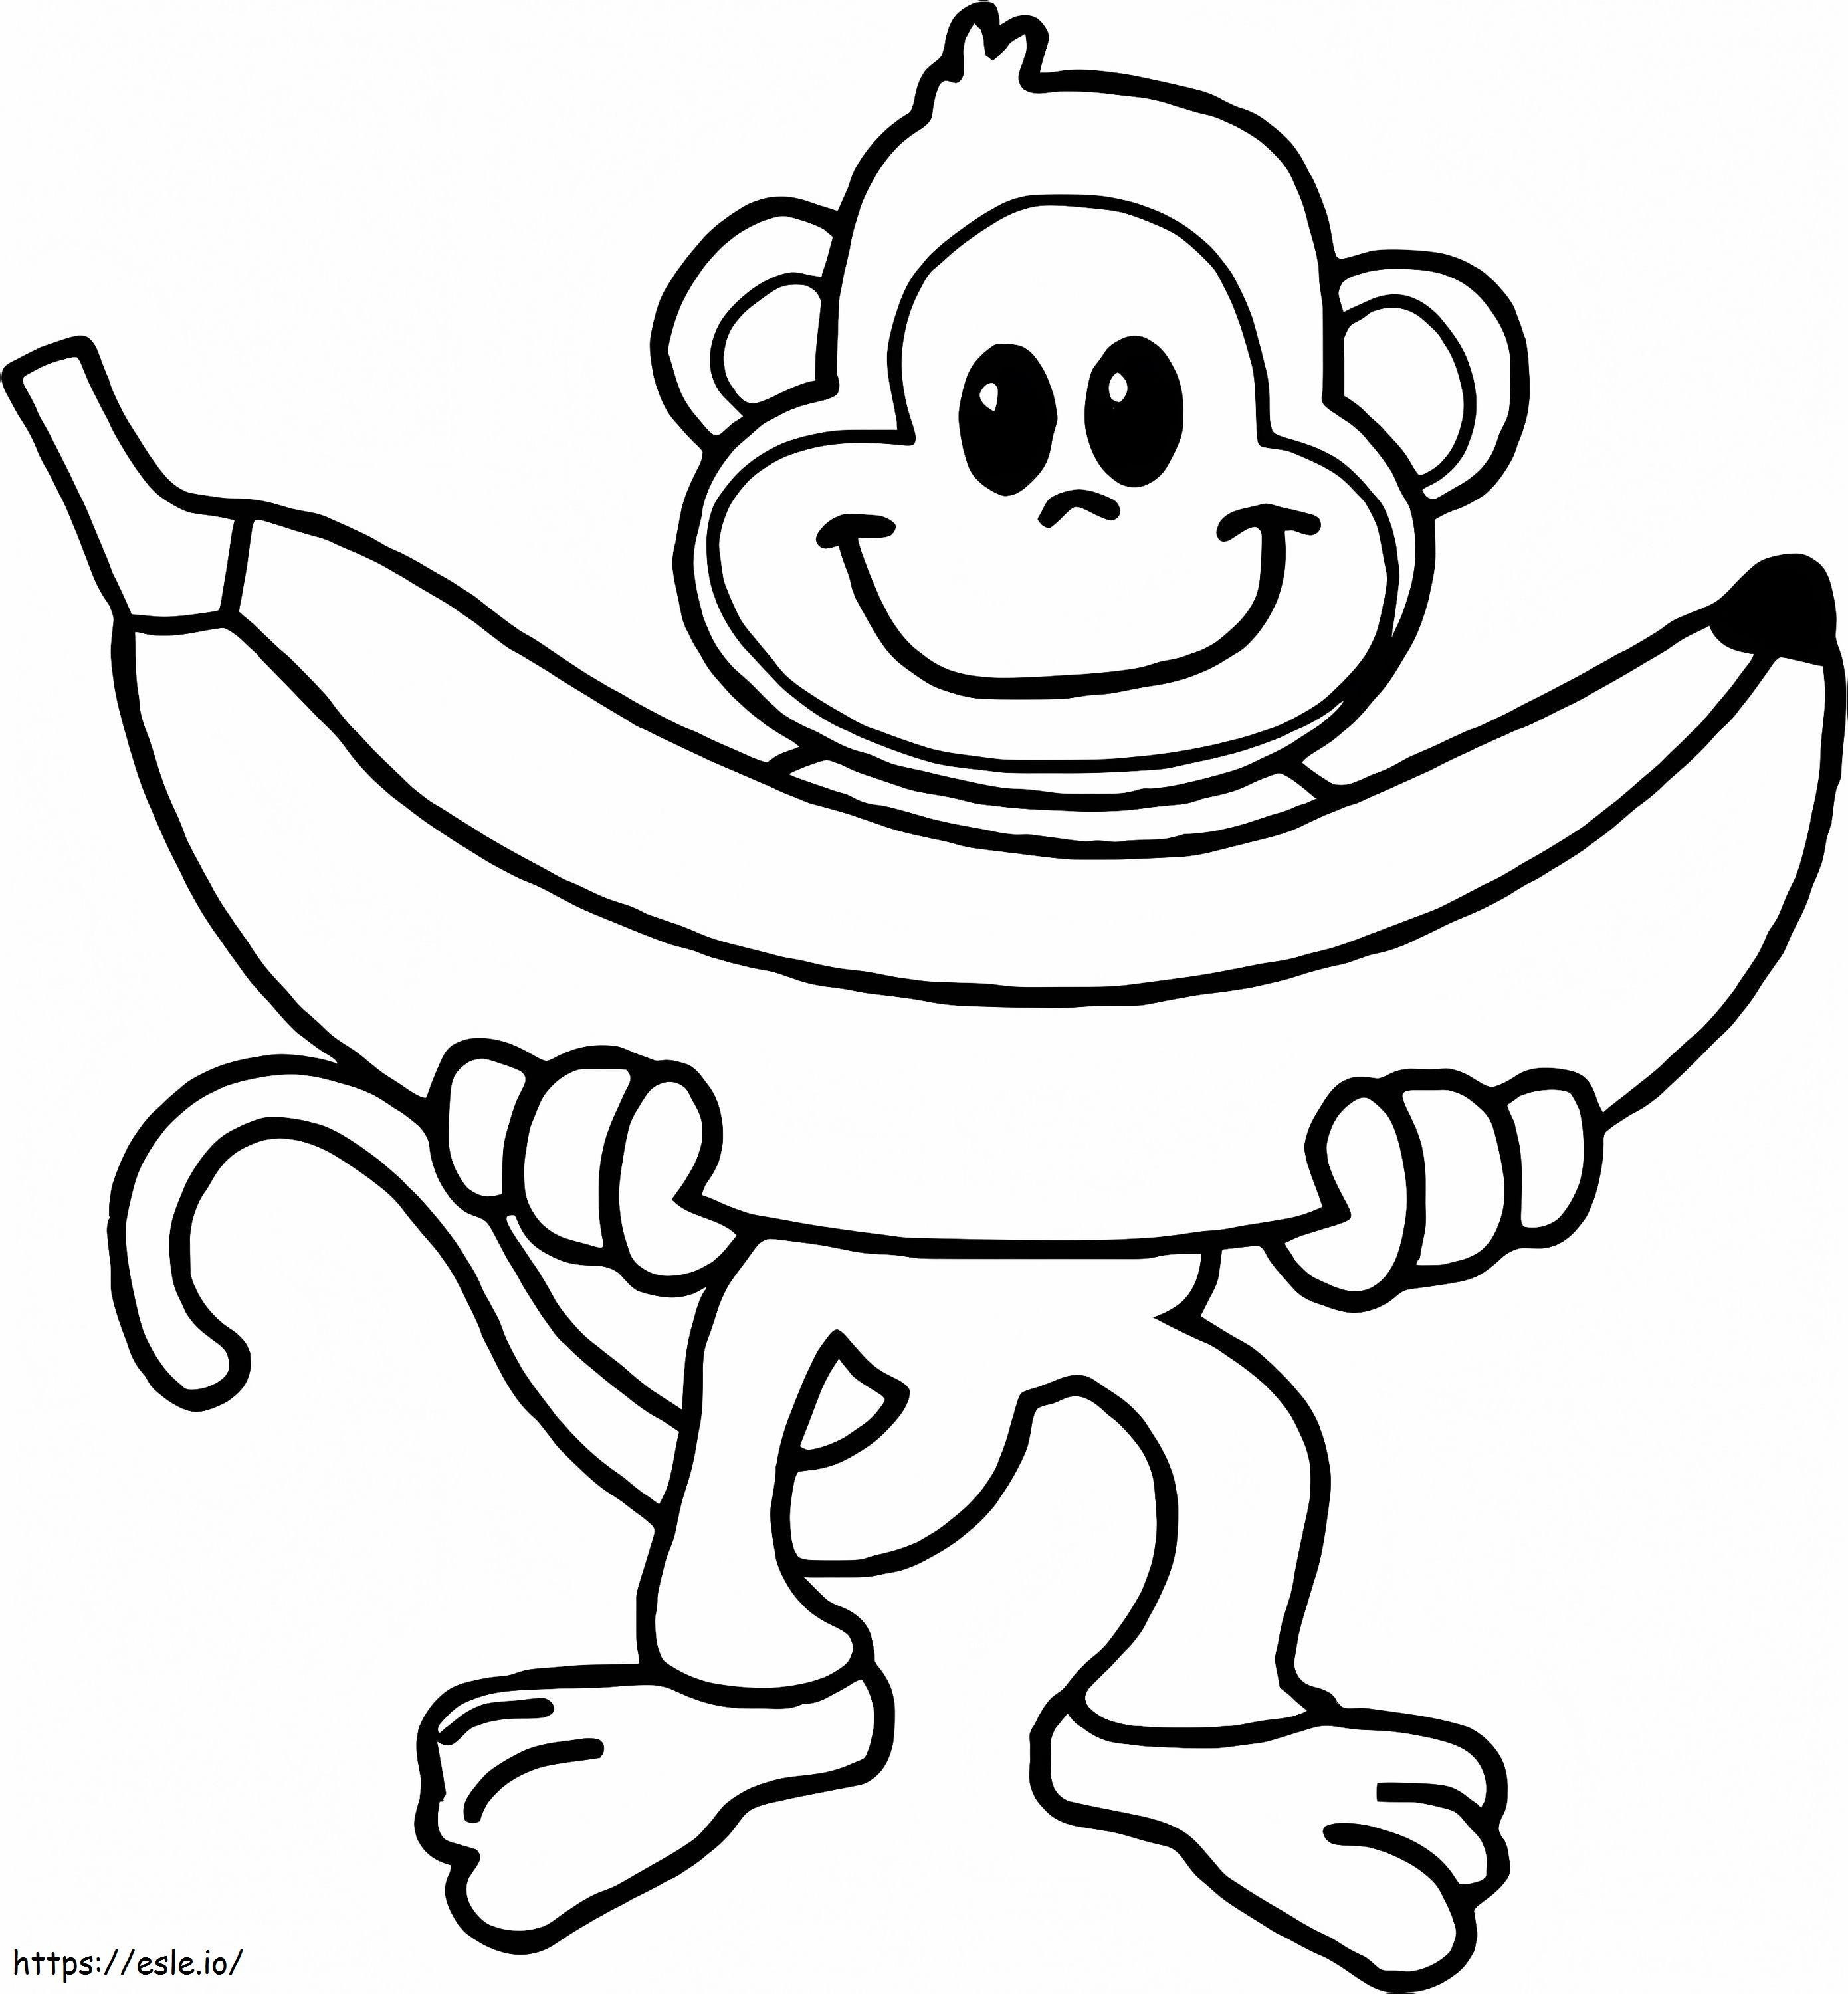 Monkey Holding A Large Banana coloring page